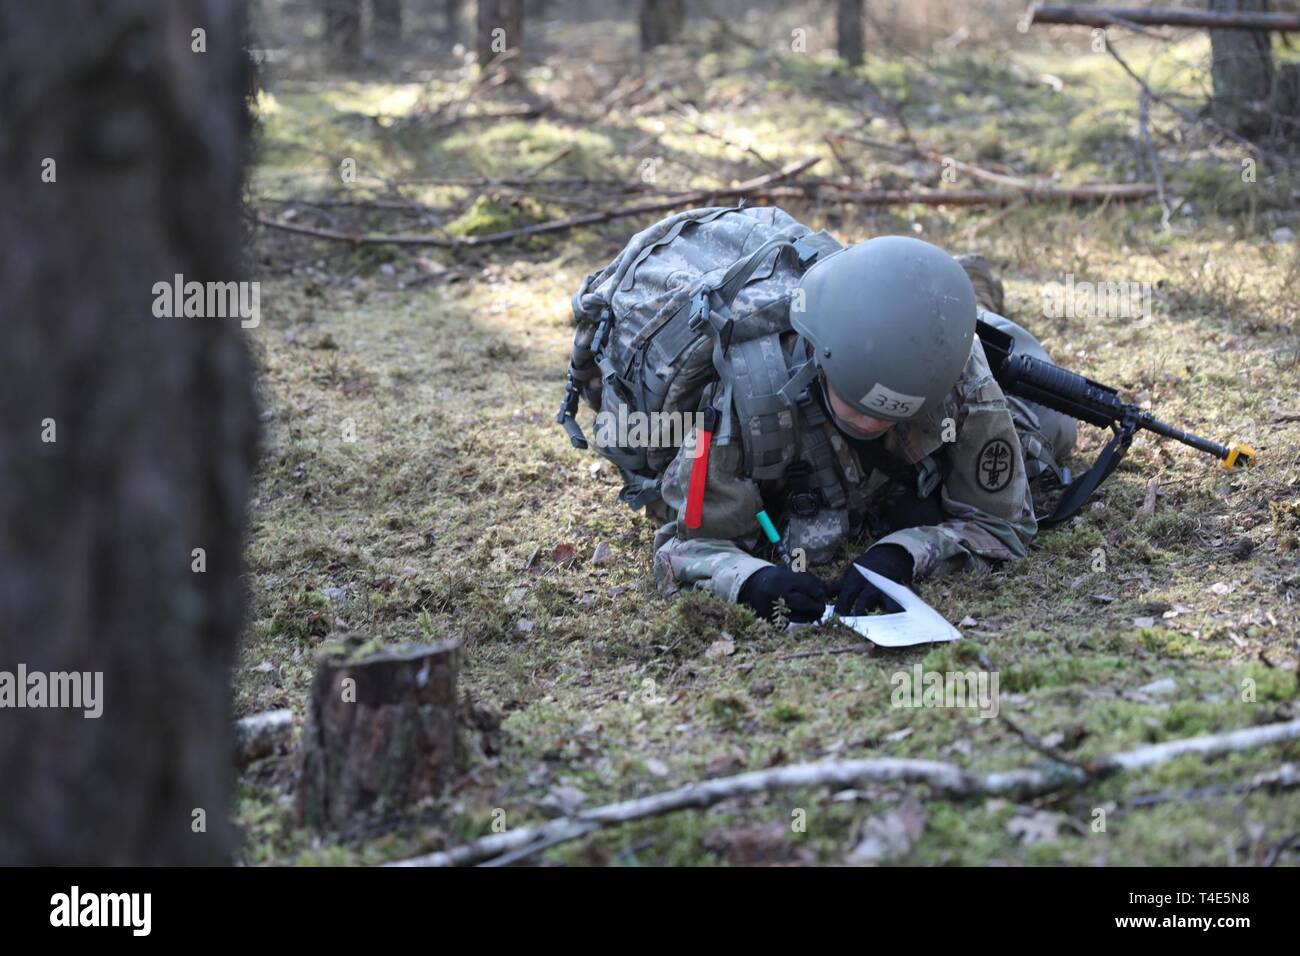 Spc. Vanessa Iturri, Regional Health Command Europe, fills out a situation report on a simulated unexploded ordnance at Grafenwoehr Training Area, Germany, March 31, 2019. Iturri is the last Soldier in her Platoon trying to earn the Expert Field Medical Badge. Stock Photo